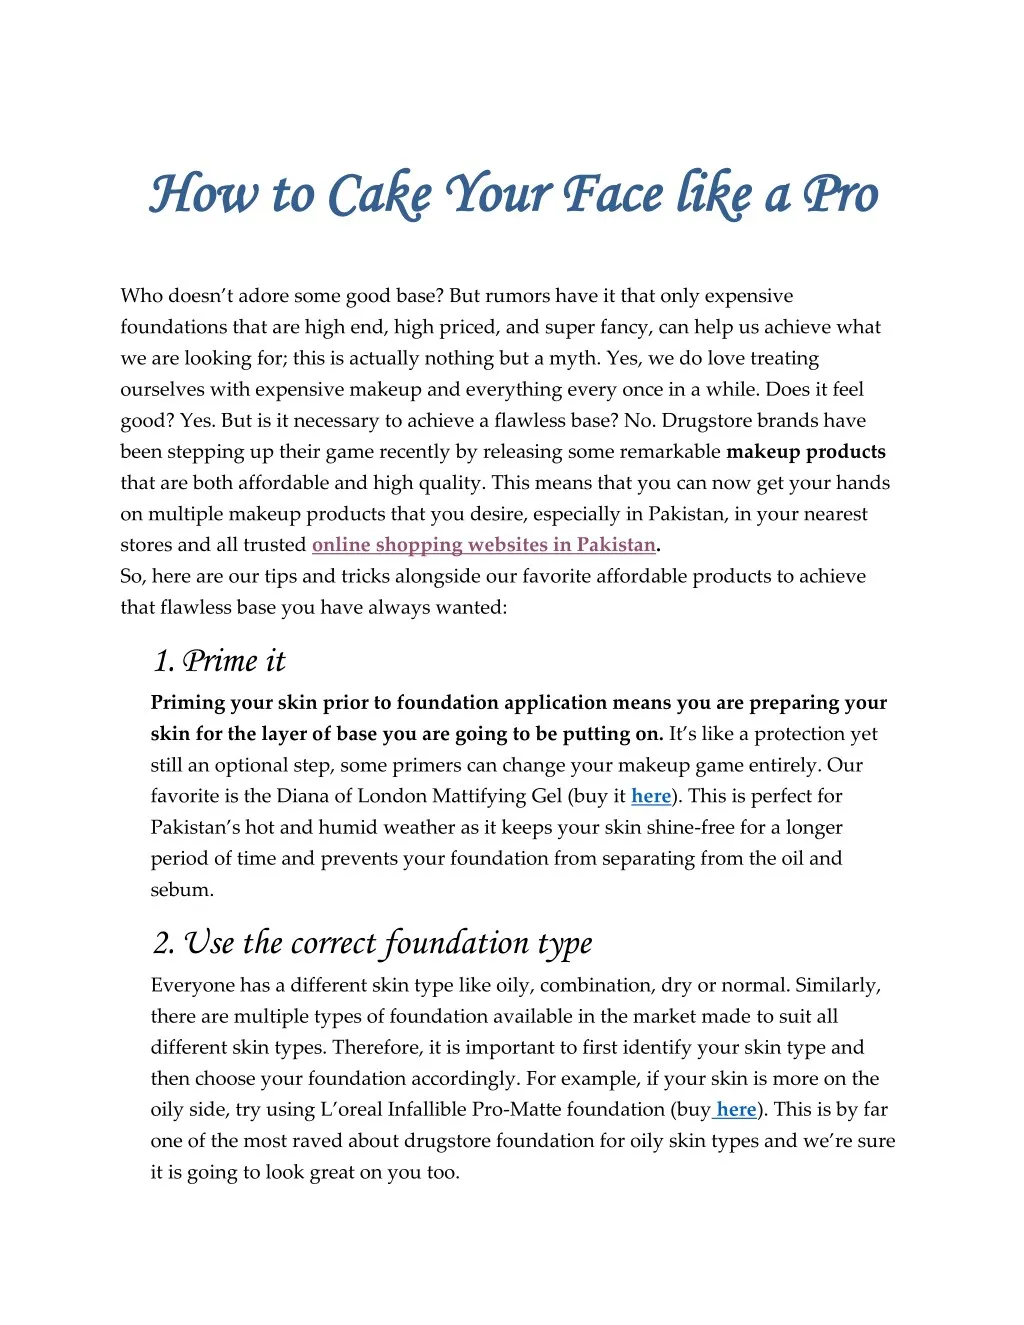 how to cake your face like a pro how to cake your